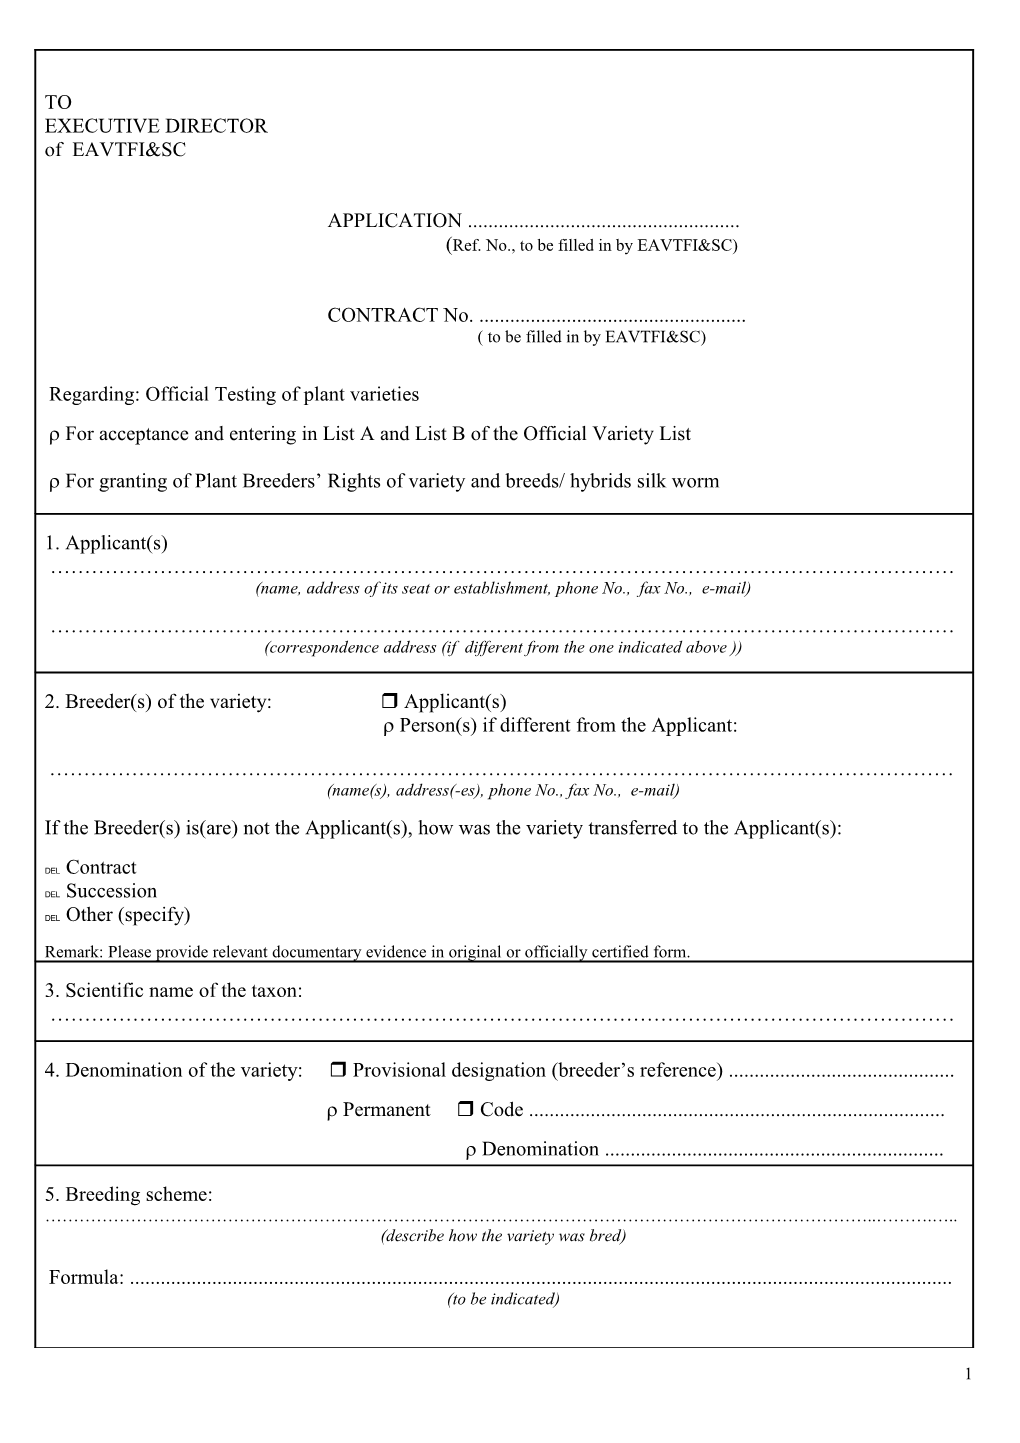 Application for DUS & VCU Testing-2008